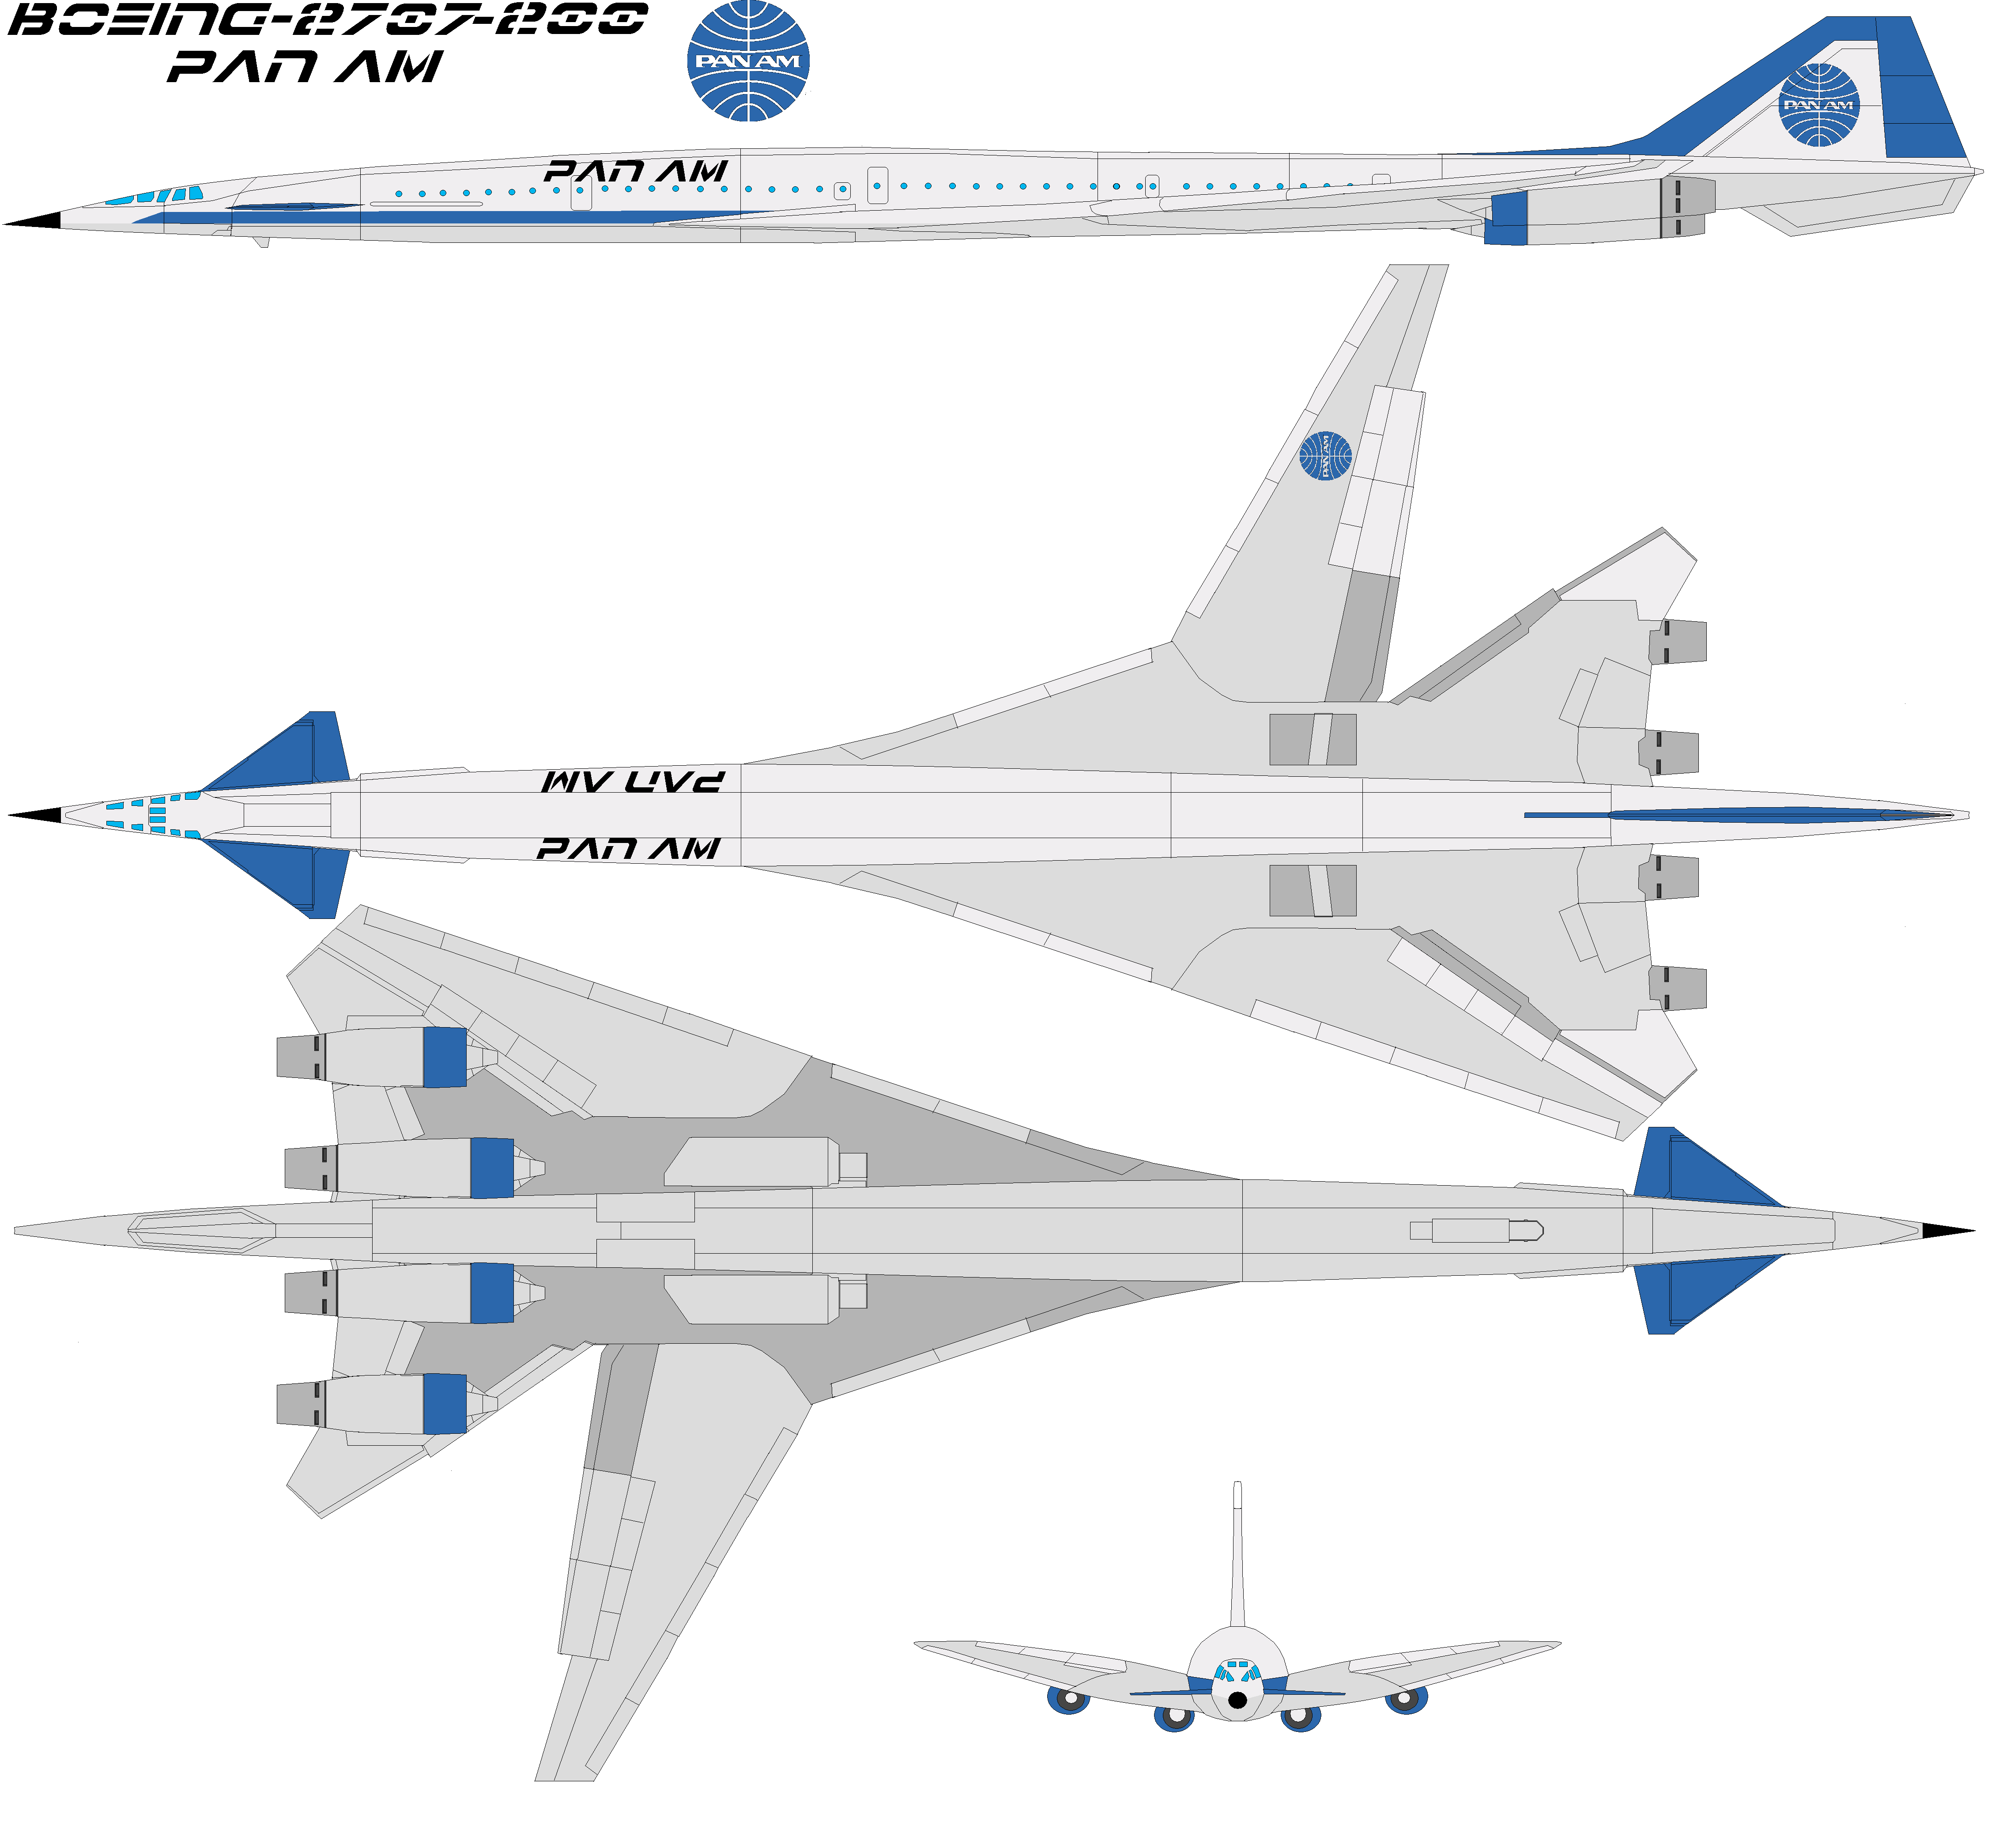 boeing_2707_200_pan_am_by_bagera3005-d4bk6sr.png